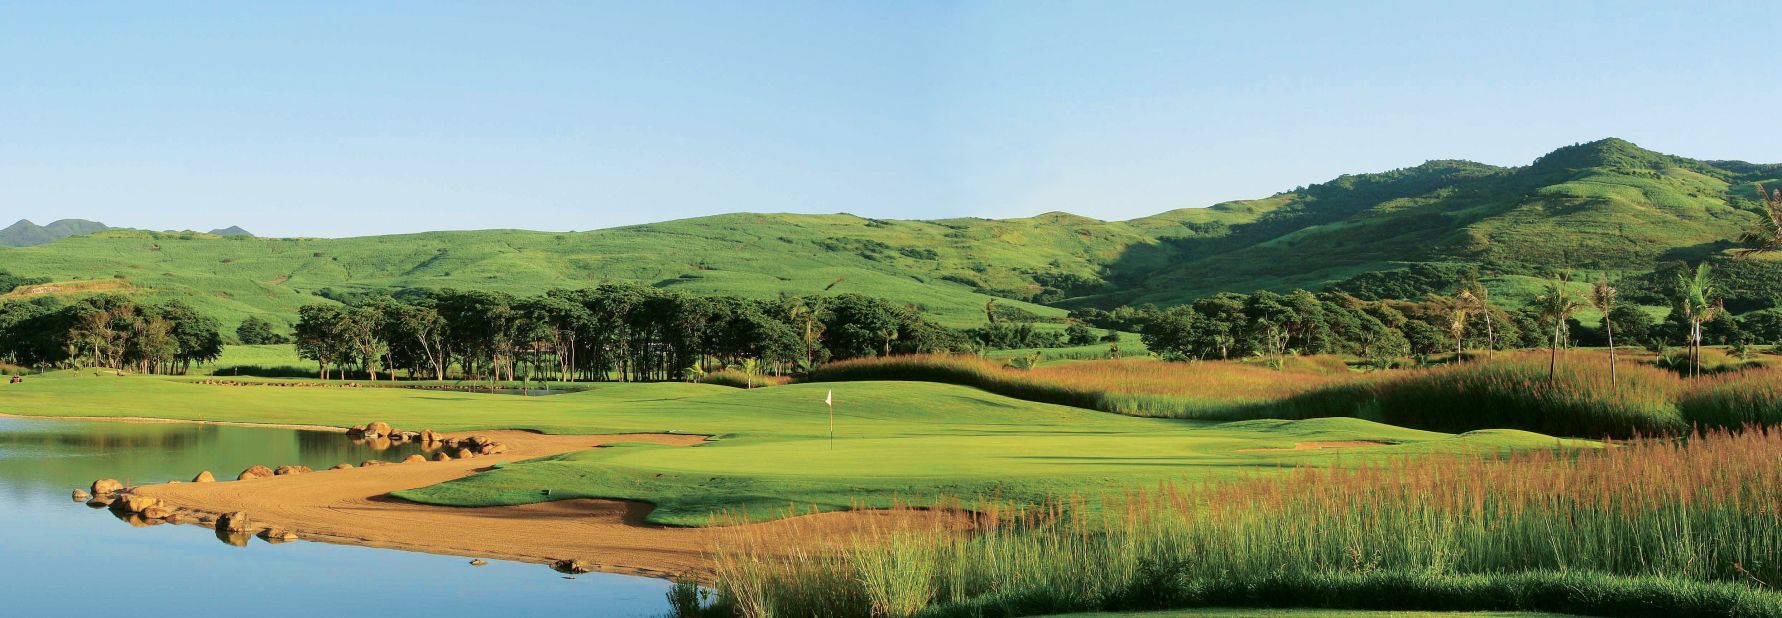 The Heritage Golf Club course measures more than 7,000 yards, par 72 from the back tees. Majestic views of the Indian Ocean are available from various holes, which rise up into the foothills of Bel Ombre in the south of the island. 